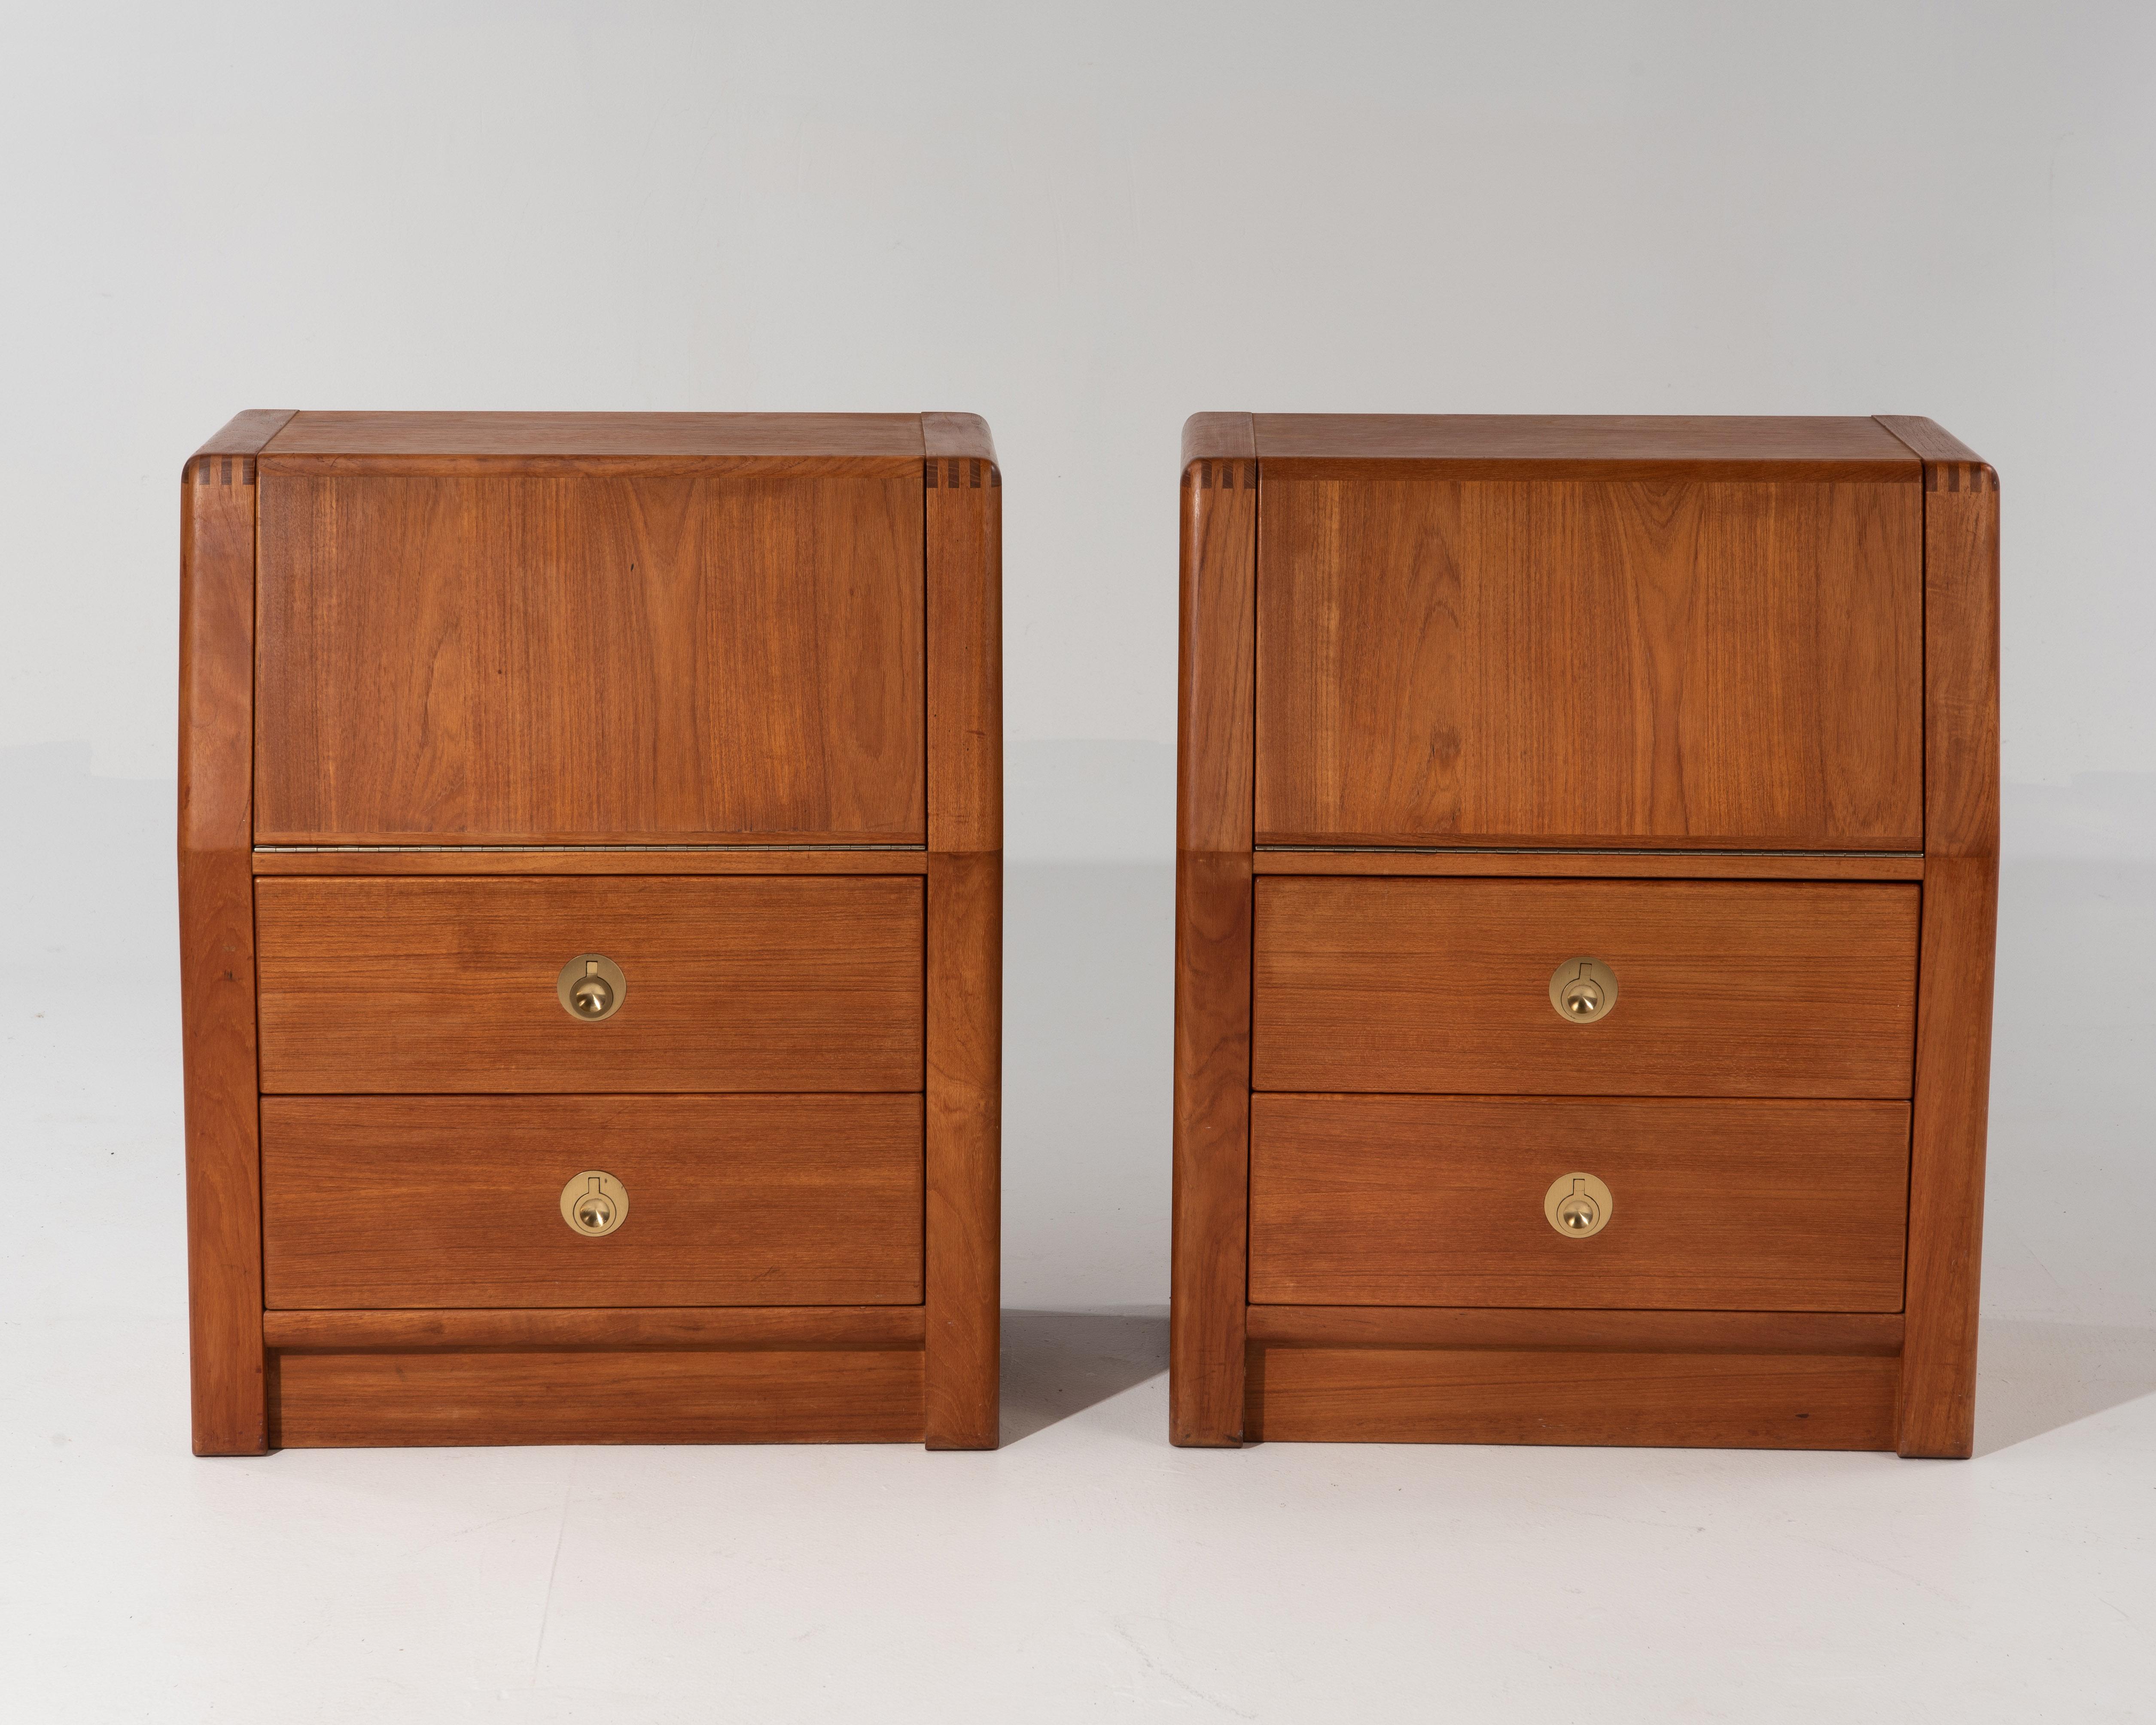 A beautiful and well made pair of Danish teak nightstands made by D-Scan in the 1970s for their 